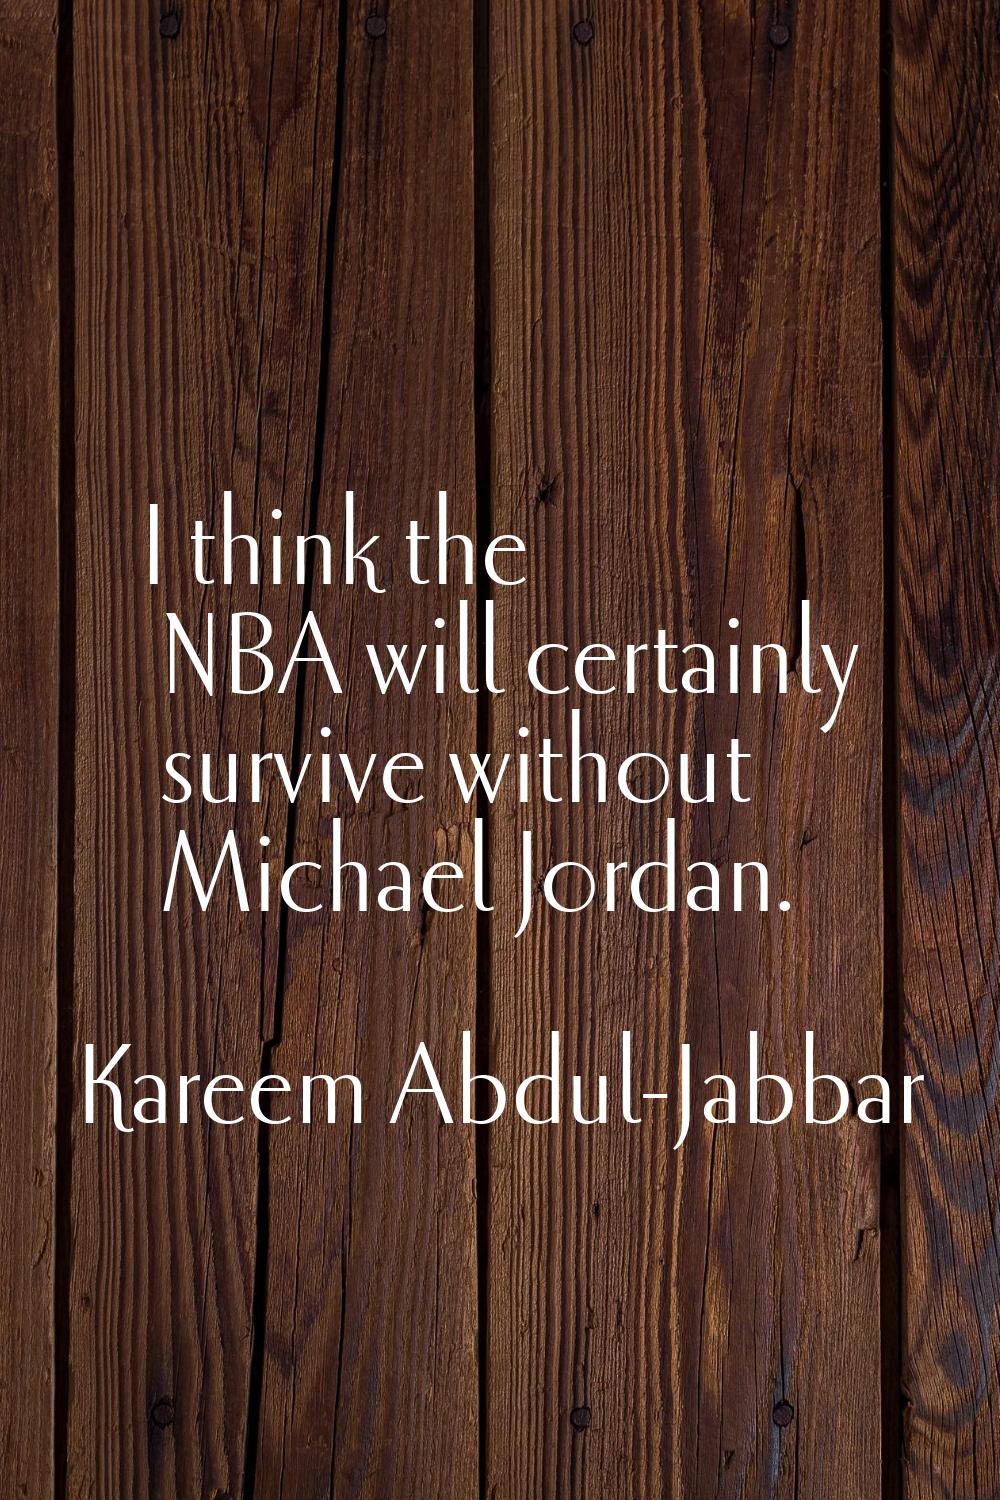 I think the NBA will certainly survive without Michael Jordan.